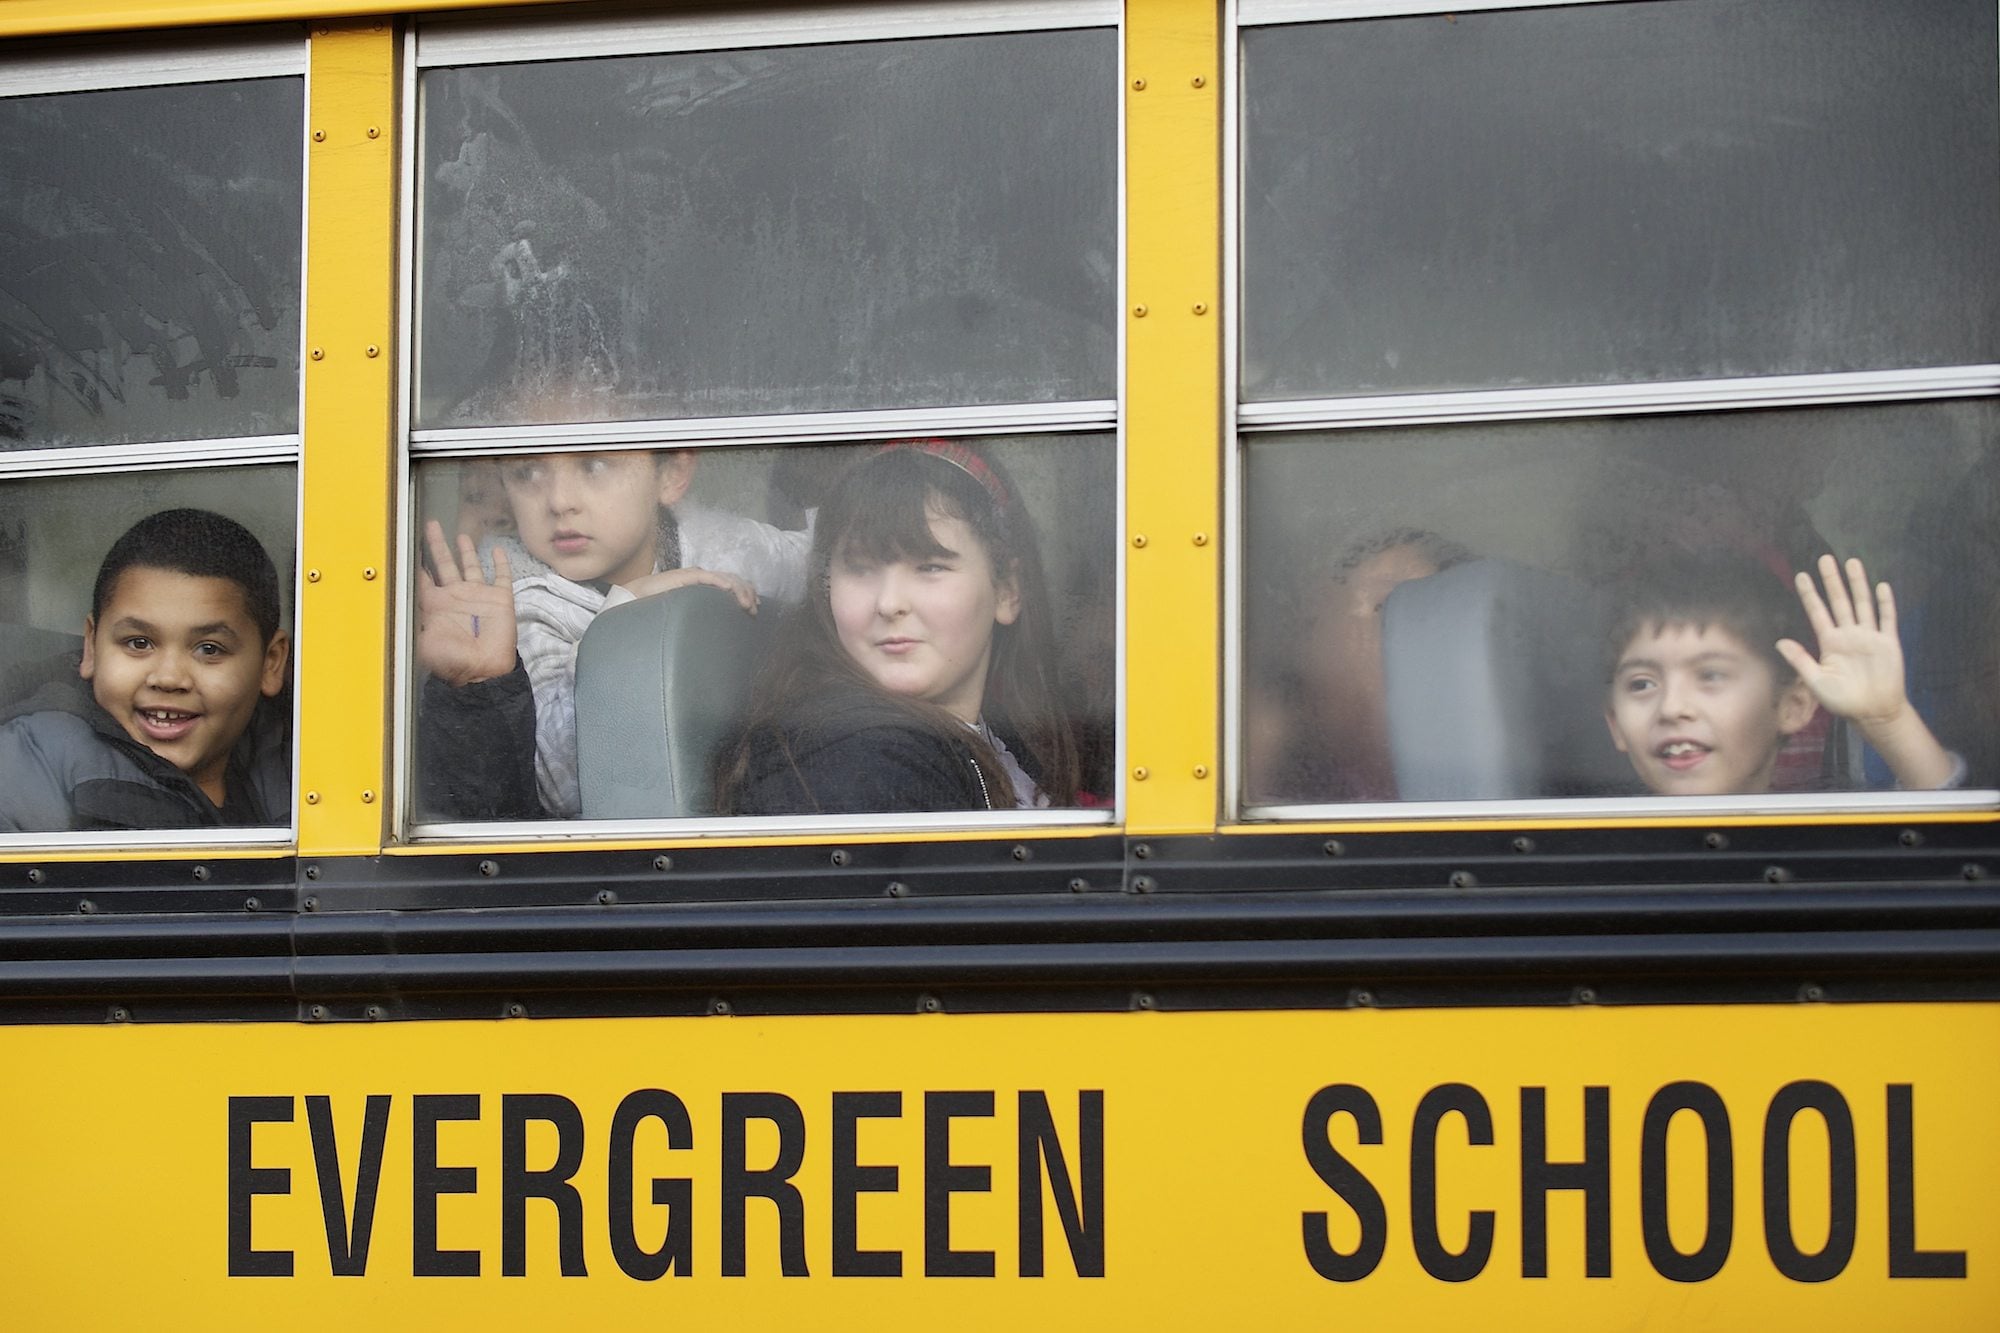 Student transportation is paid for through local levy dollars. Six Clark County school districts -- Evergreen, Green Mountain, Hockinson, La Center, Ridgefield and Vancouver -- have placed levies on the Feb. 9 ballot.